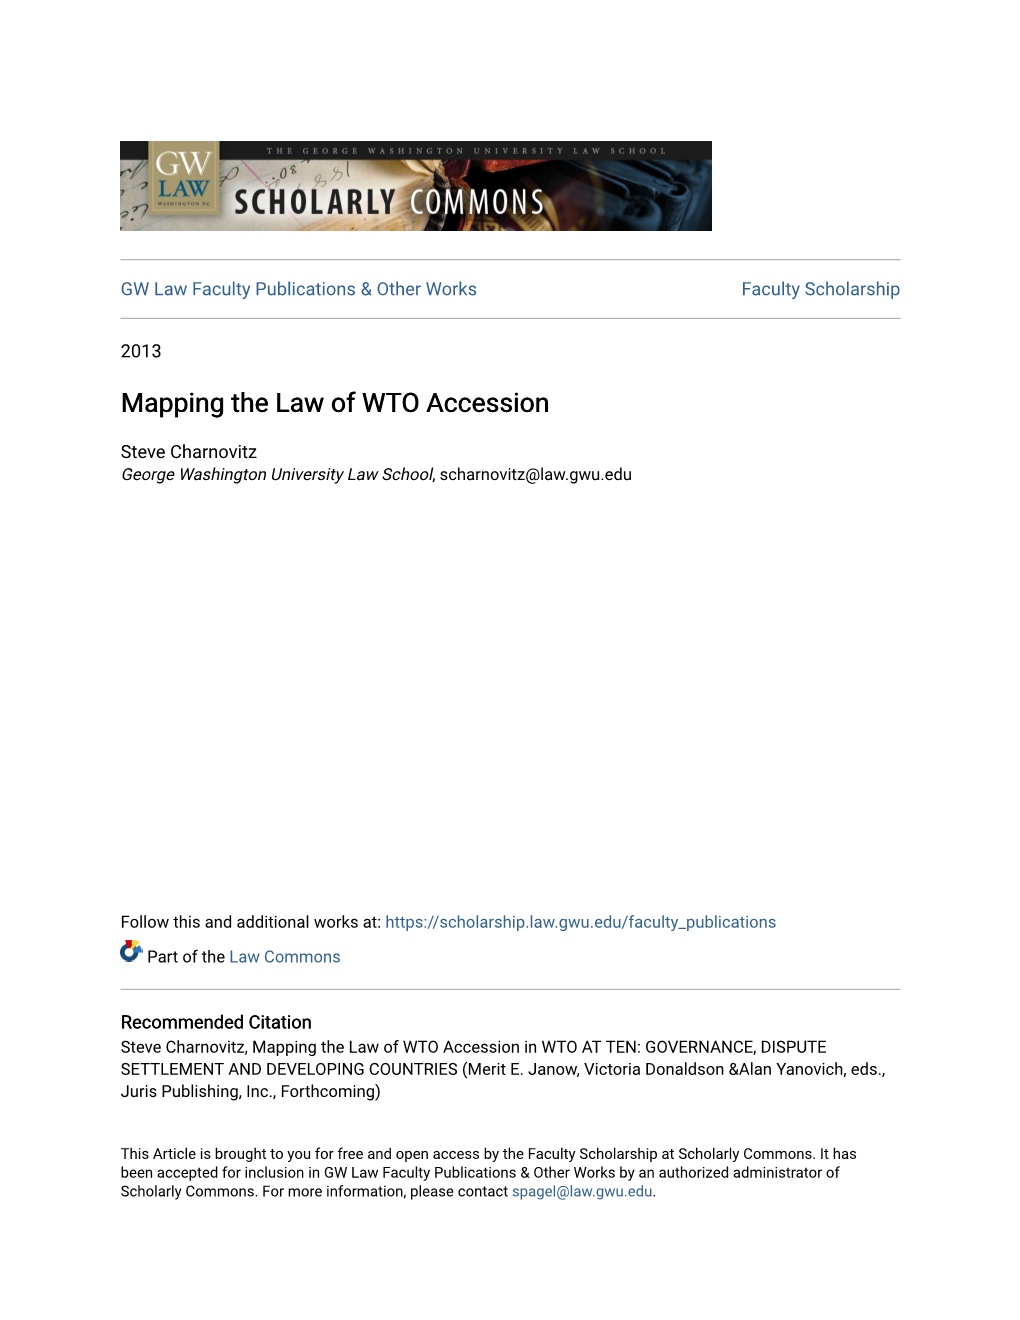 Mapping the Law of WTO Accession